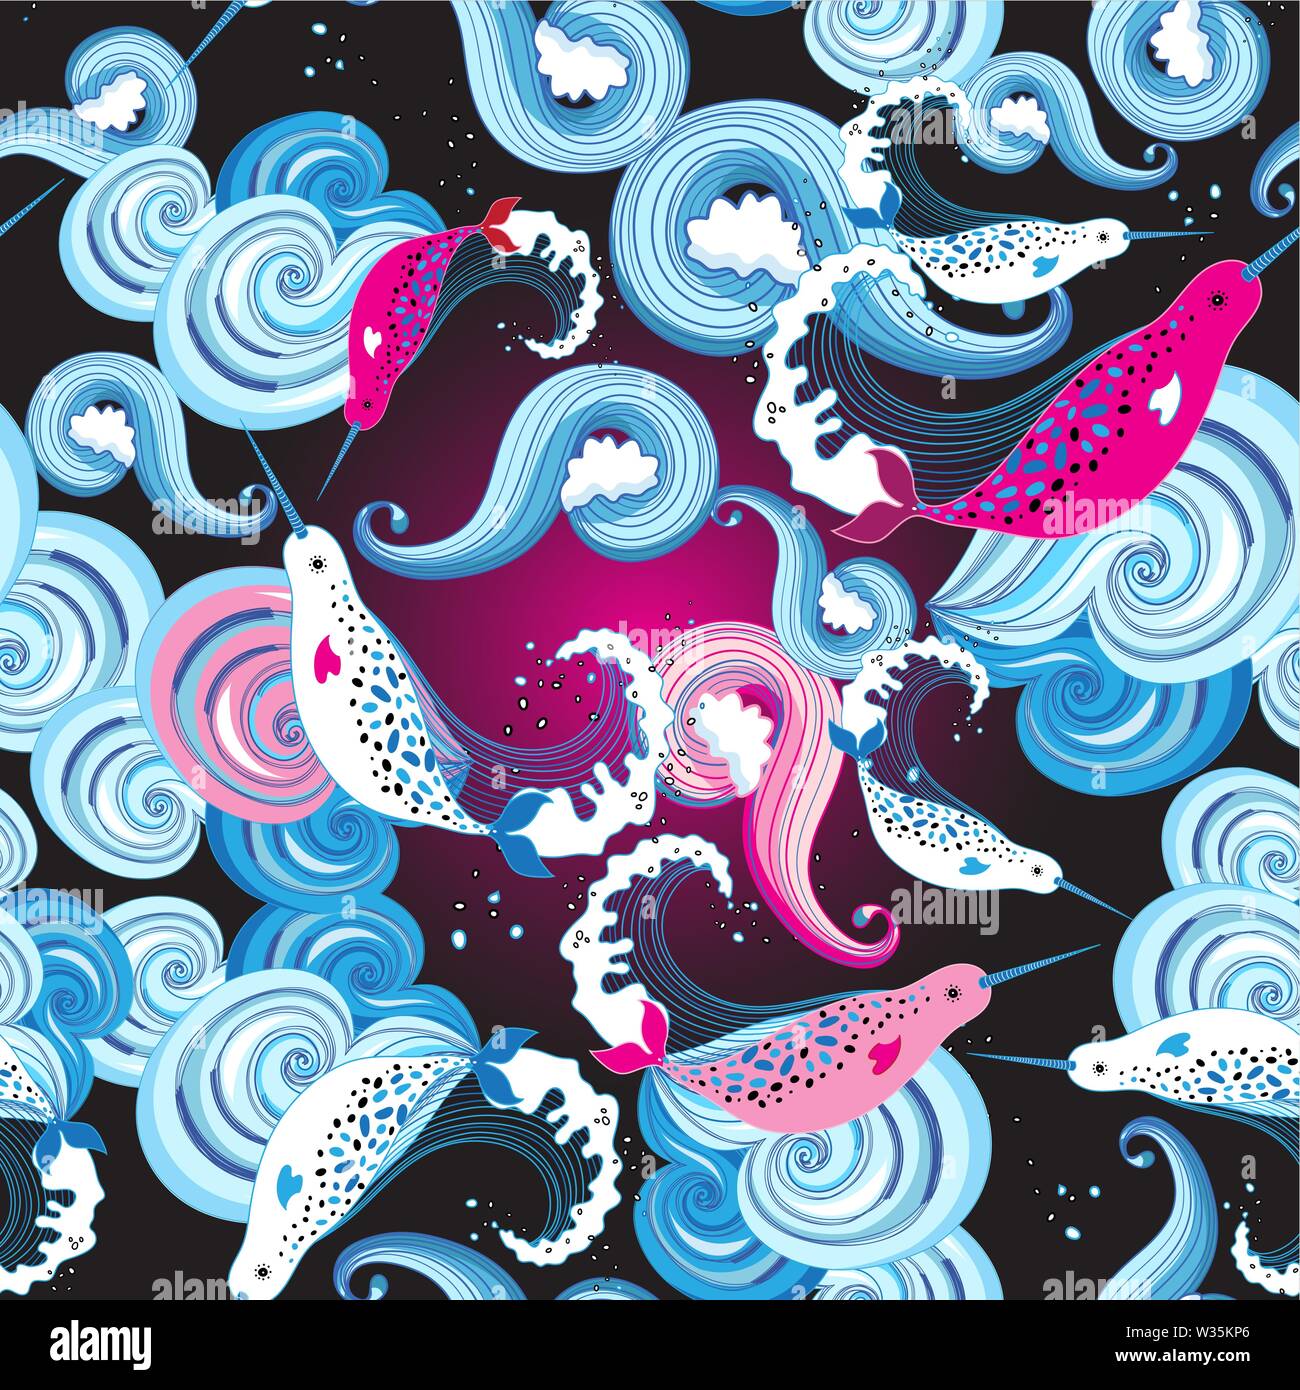 Kawaii Smiling Narwhal or Unicorn Seamless Pattern Stock Vector   Illustration of icon cartoon 217964313